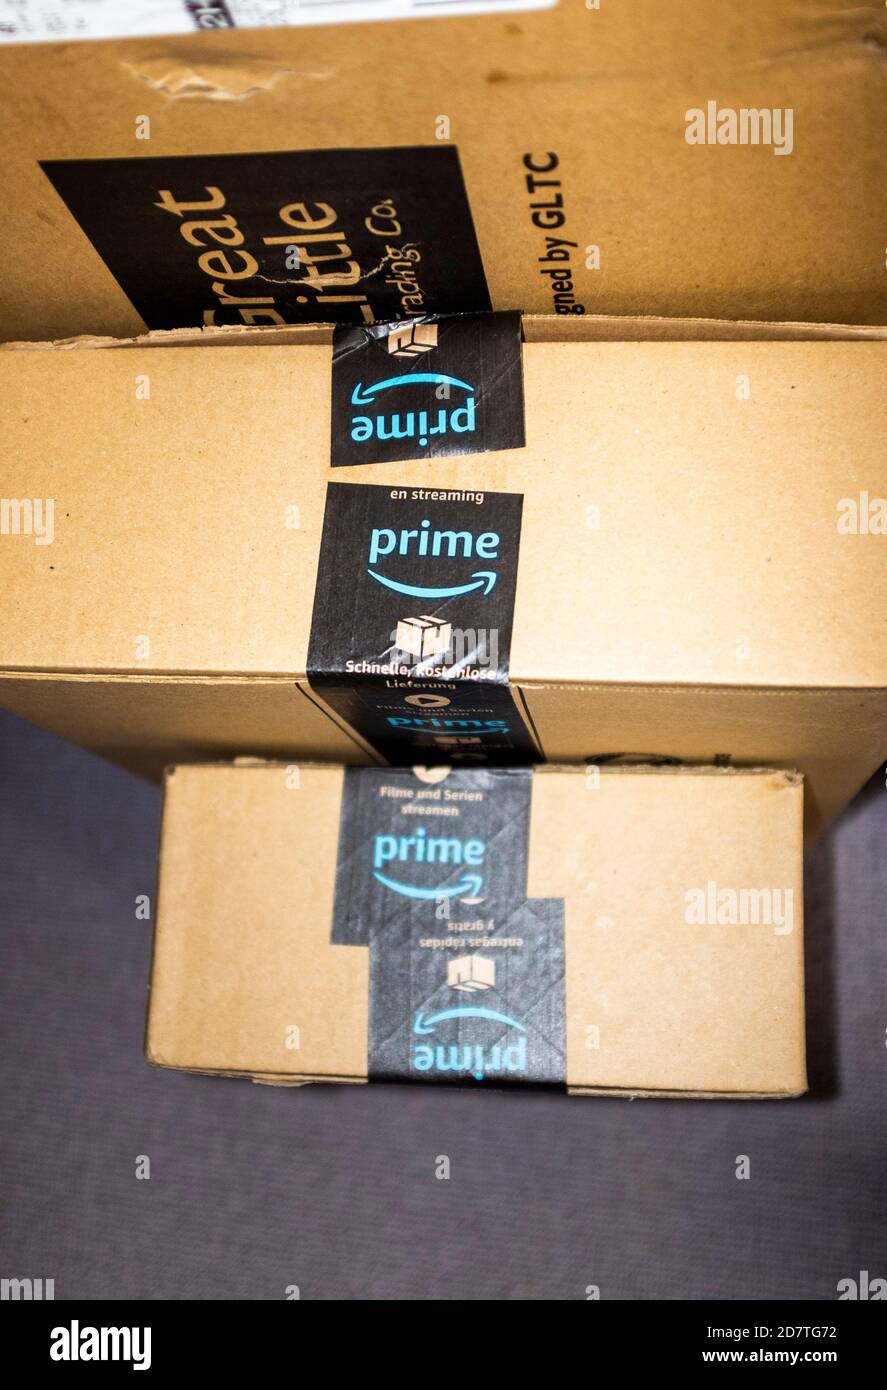 Amazon Prime online shopping home delivery packages Stock Photo